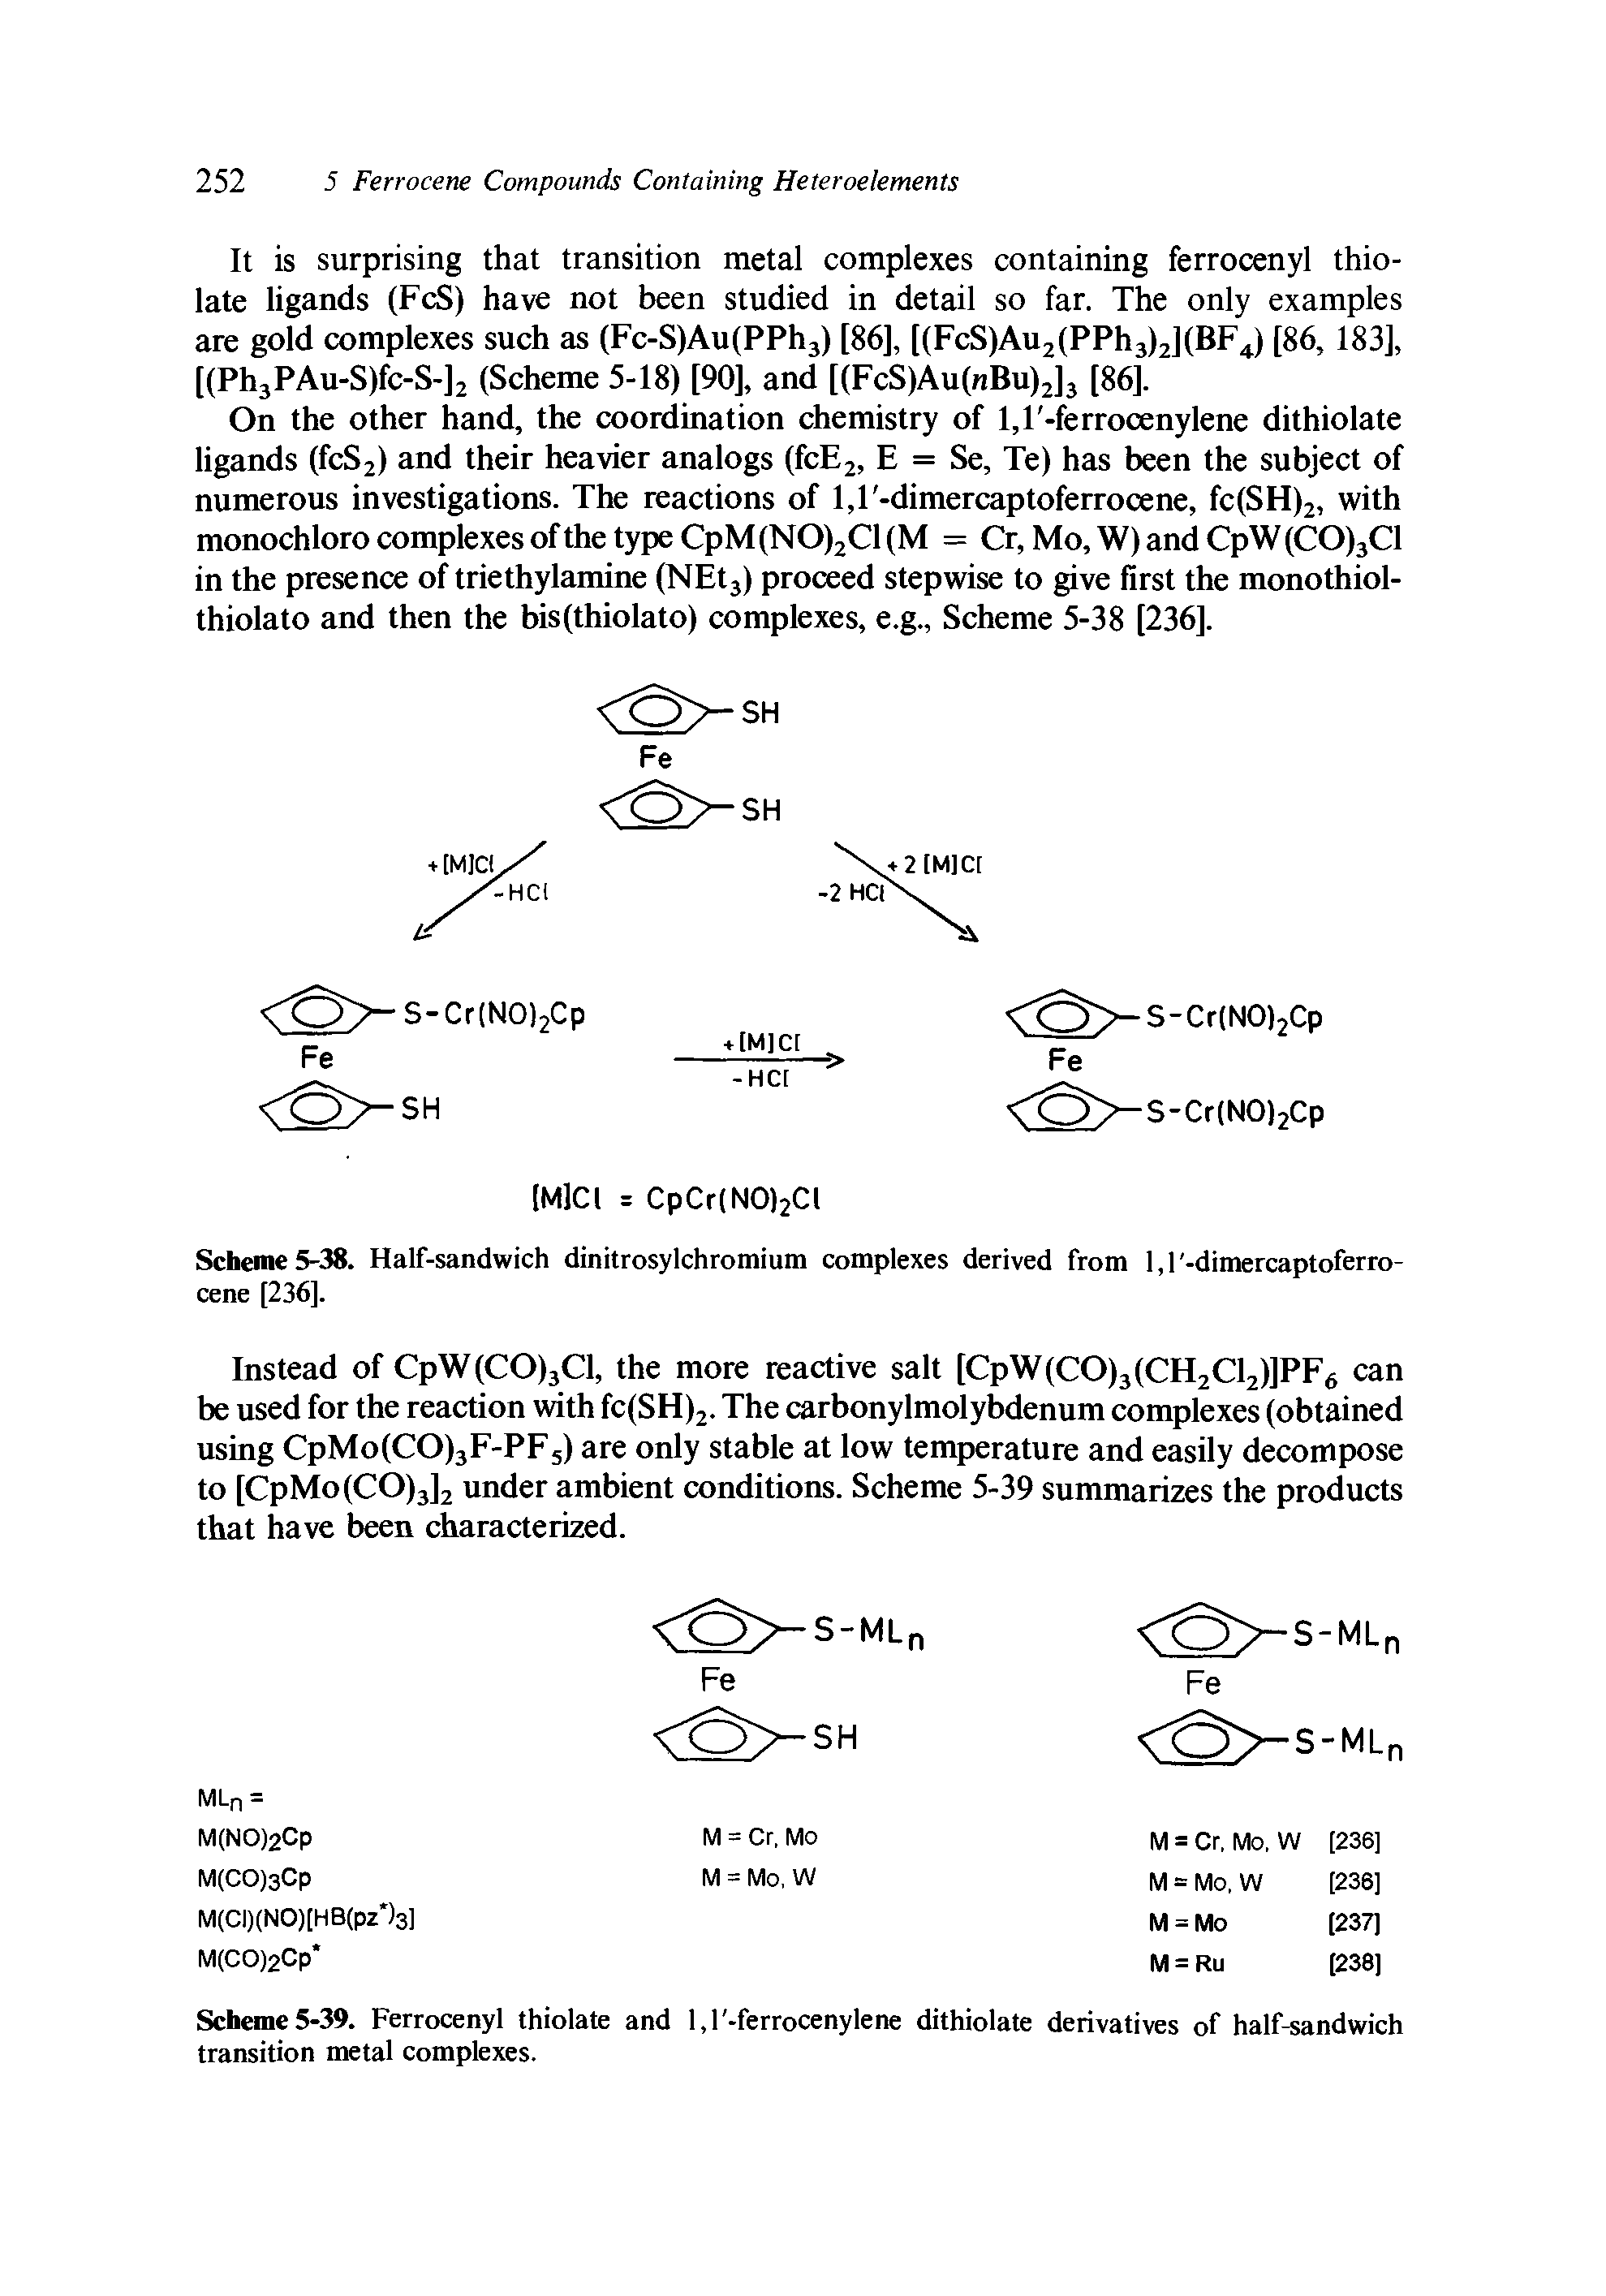 Scheme5-39. Ferrocenyl thiolate and l,l -ferrocenylene dithiolate derivatives of half-sandwich transition metal complexes.